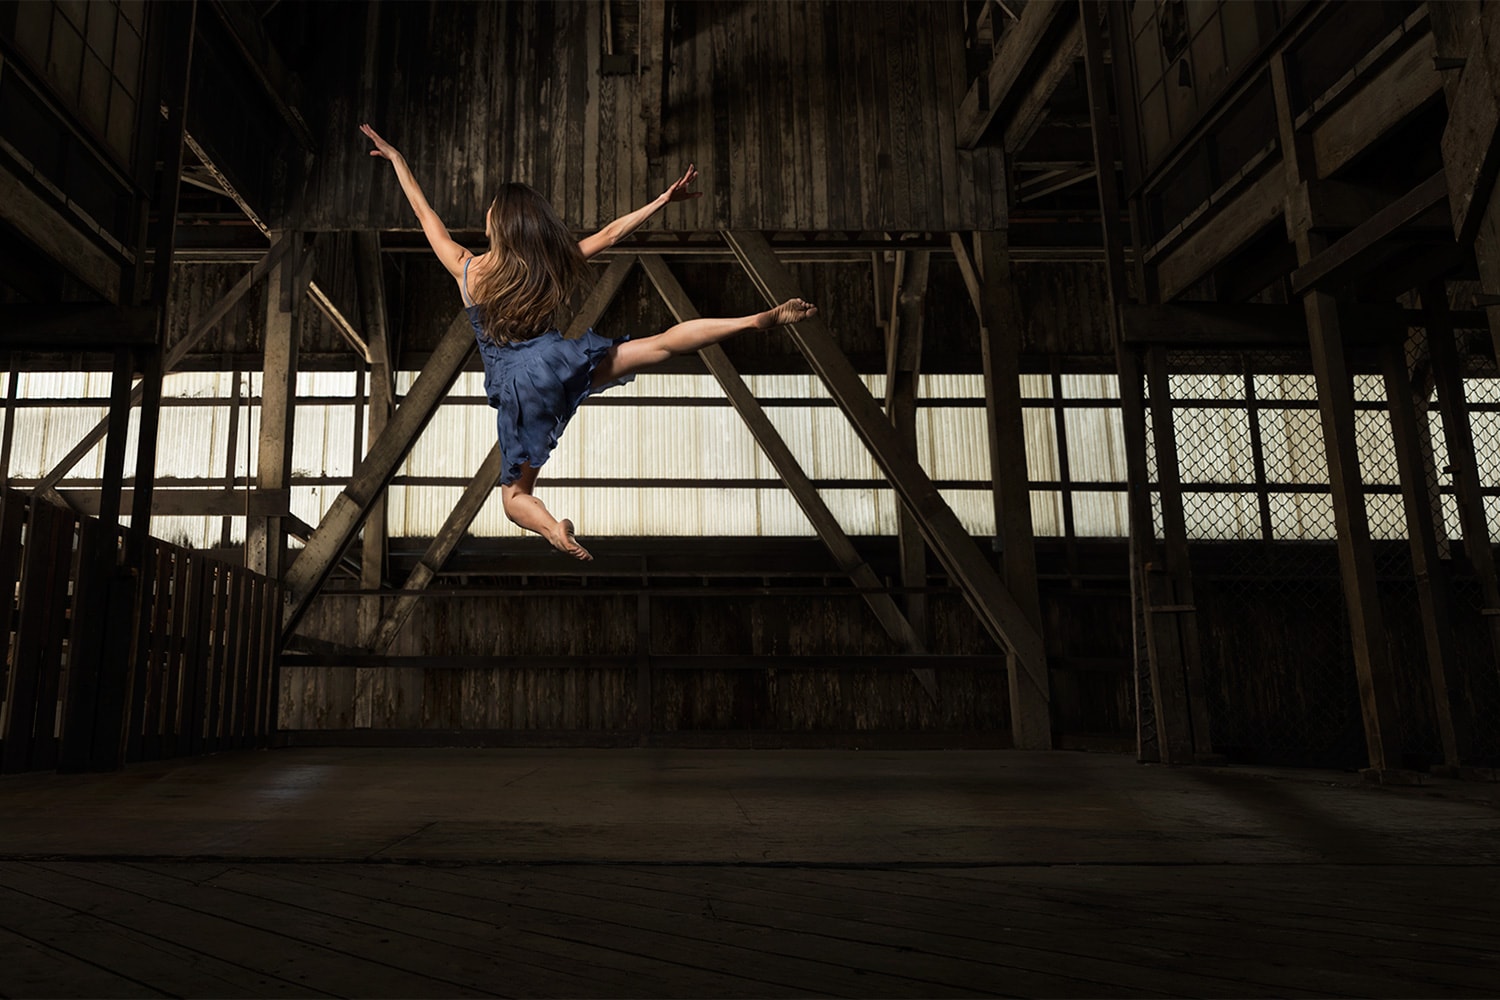 Female Ballerina Ballet jumping wearing a blue outfit dancing in a wood warehouse Photographer Rod McLean